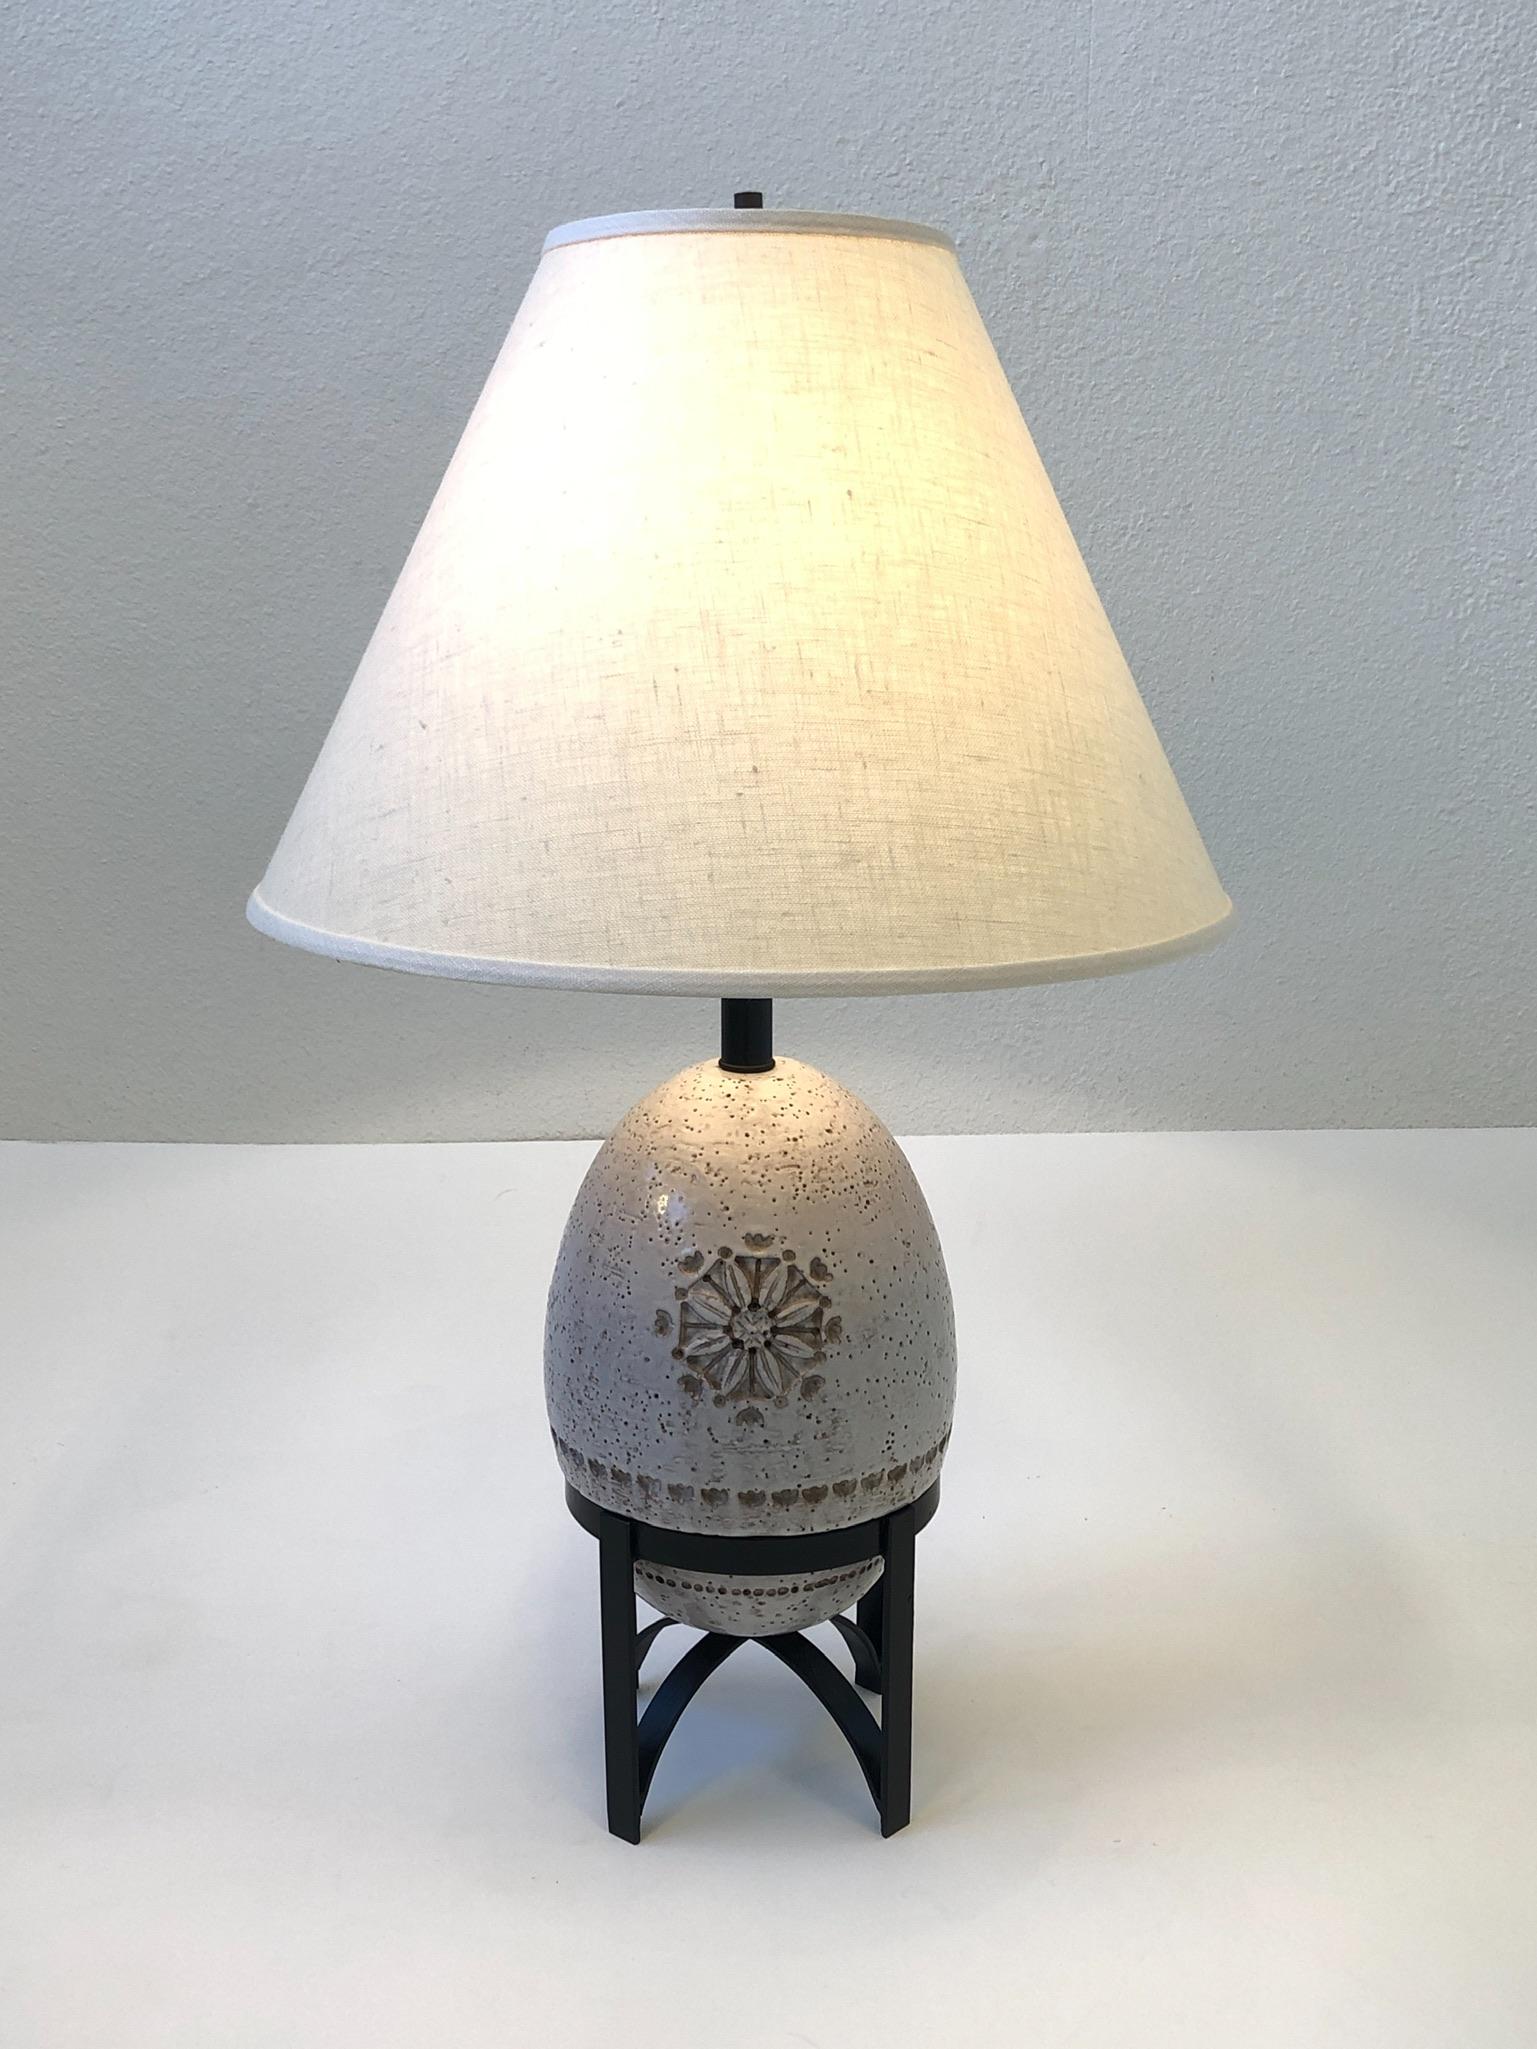 1960s Italian white glazed ceramic table lamp by Bitossi.
The lamp is constructed of white glazed egg shape ceramic that sits on a black lacquered steel base.
Newly rewired and new vanilla linen shade.
Overall dimensions with shade: 30” high, 18”